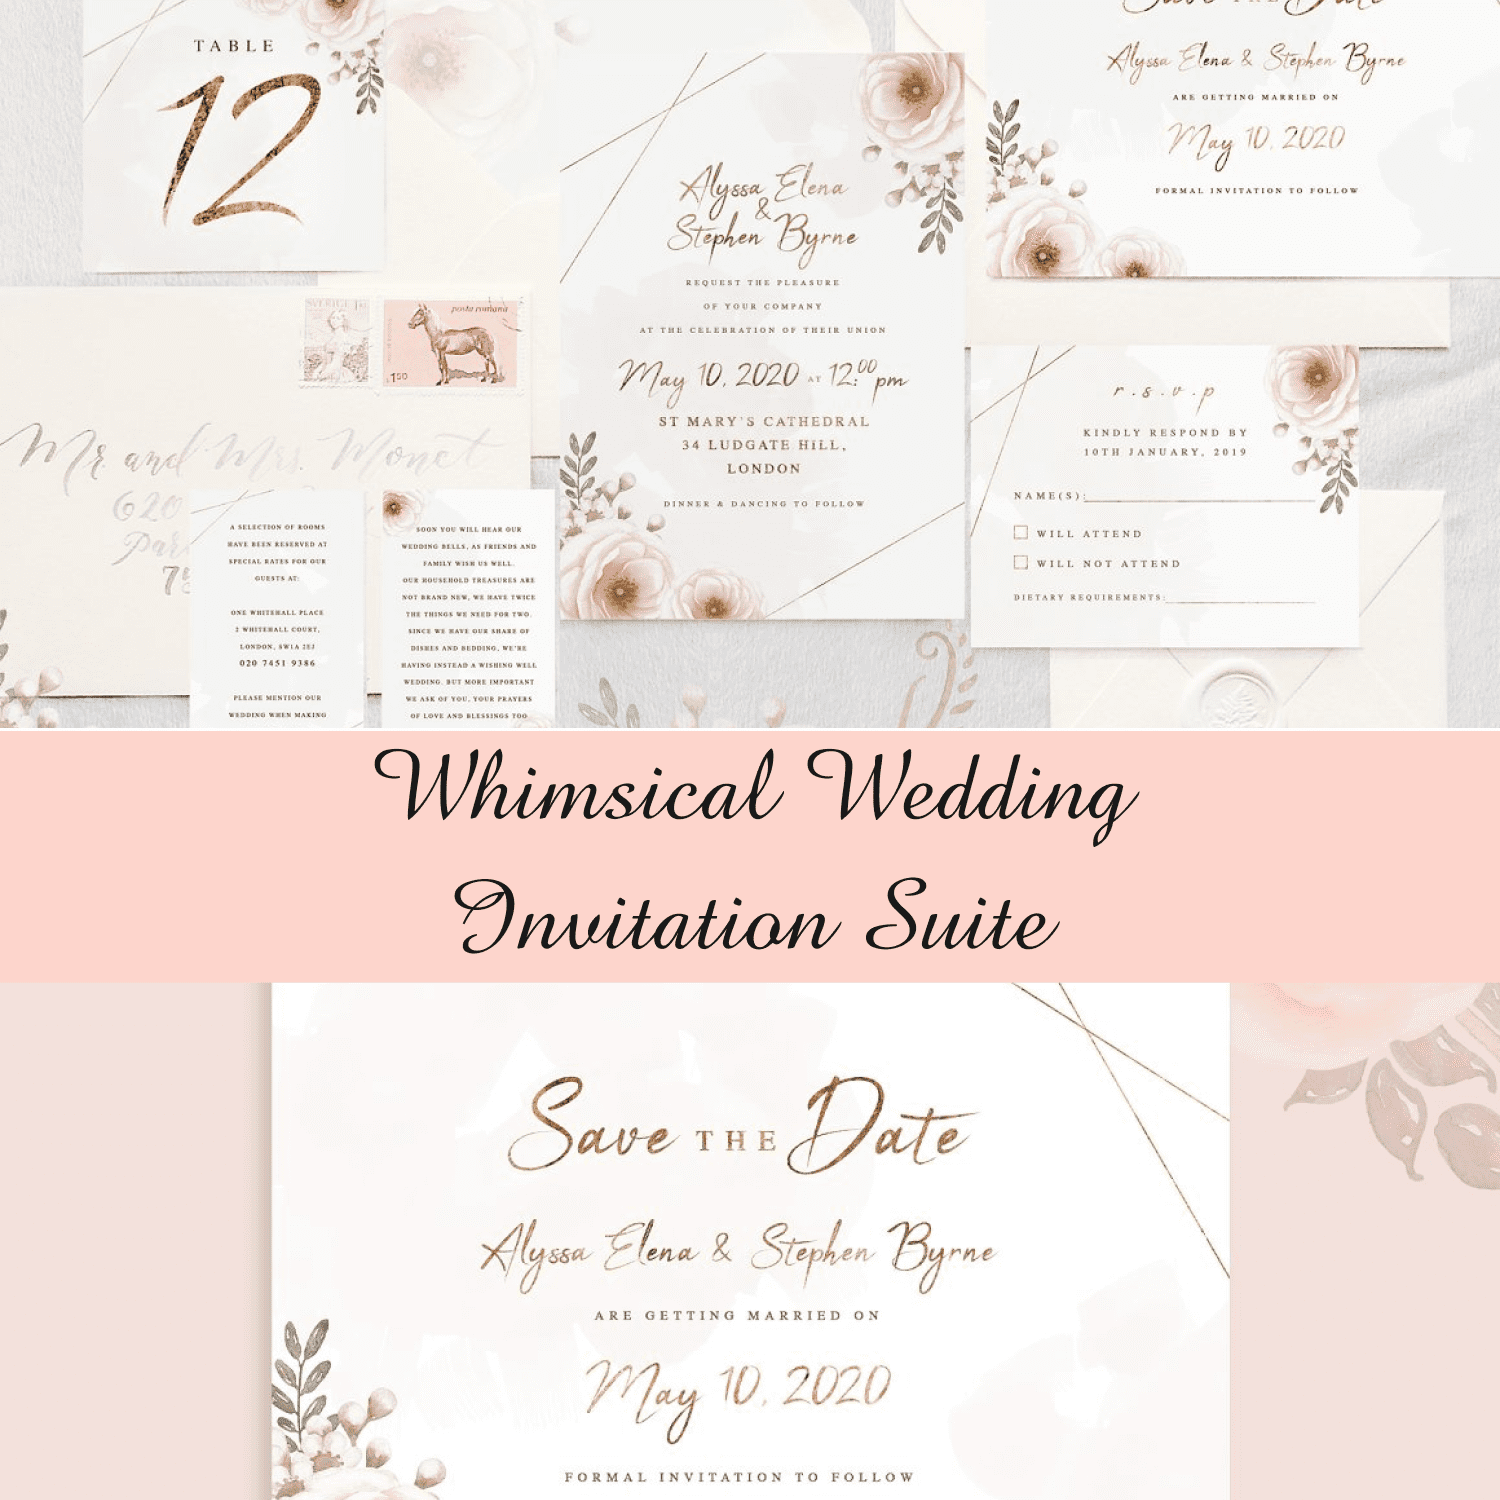 Whimsical Wedding Invitation Suite preview 1500x1500 1